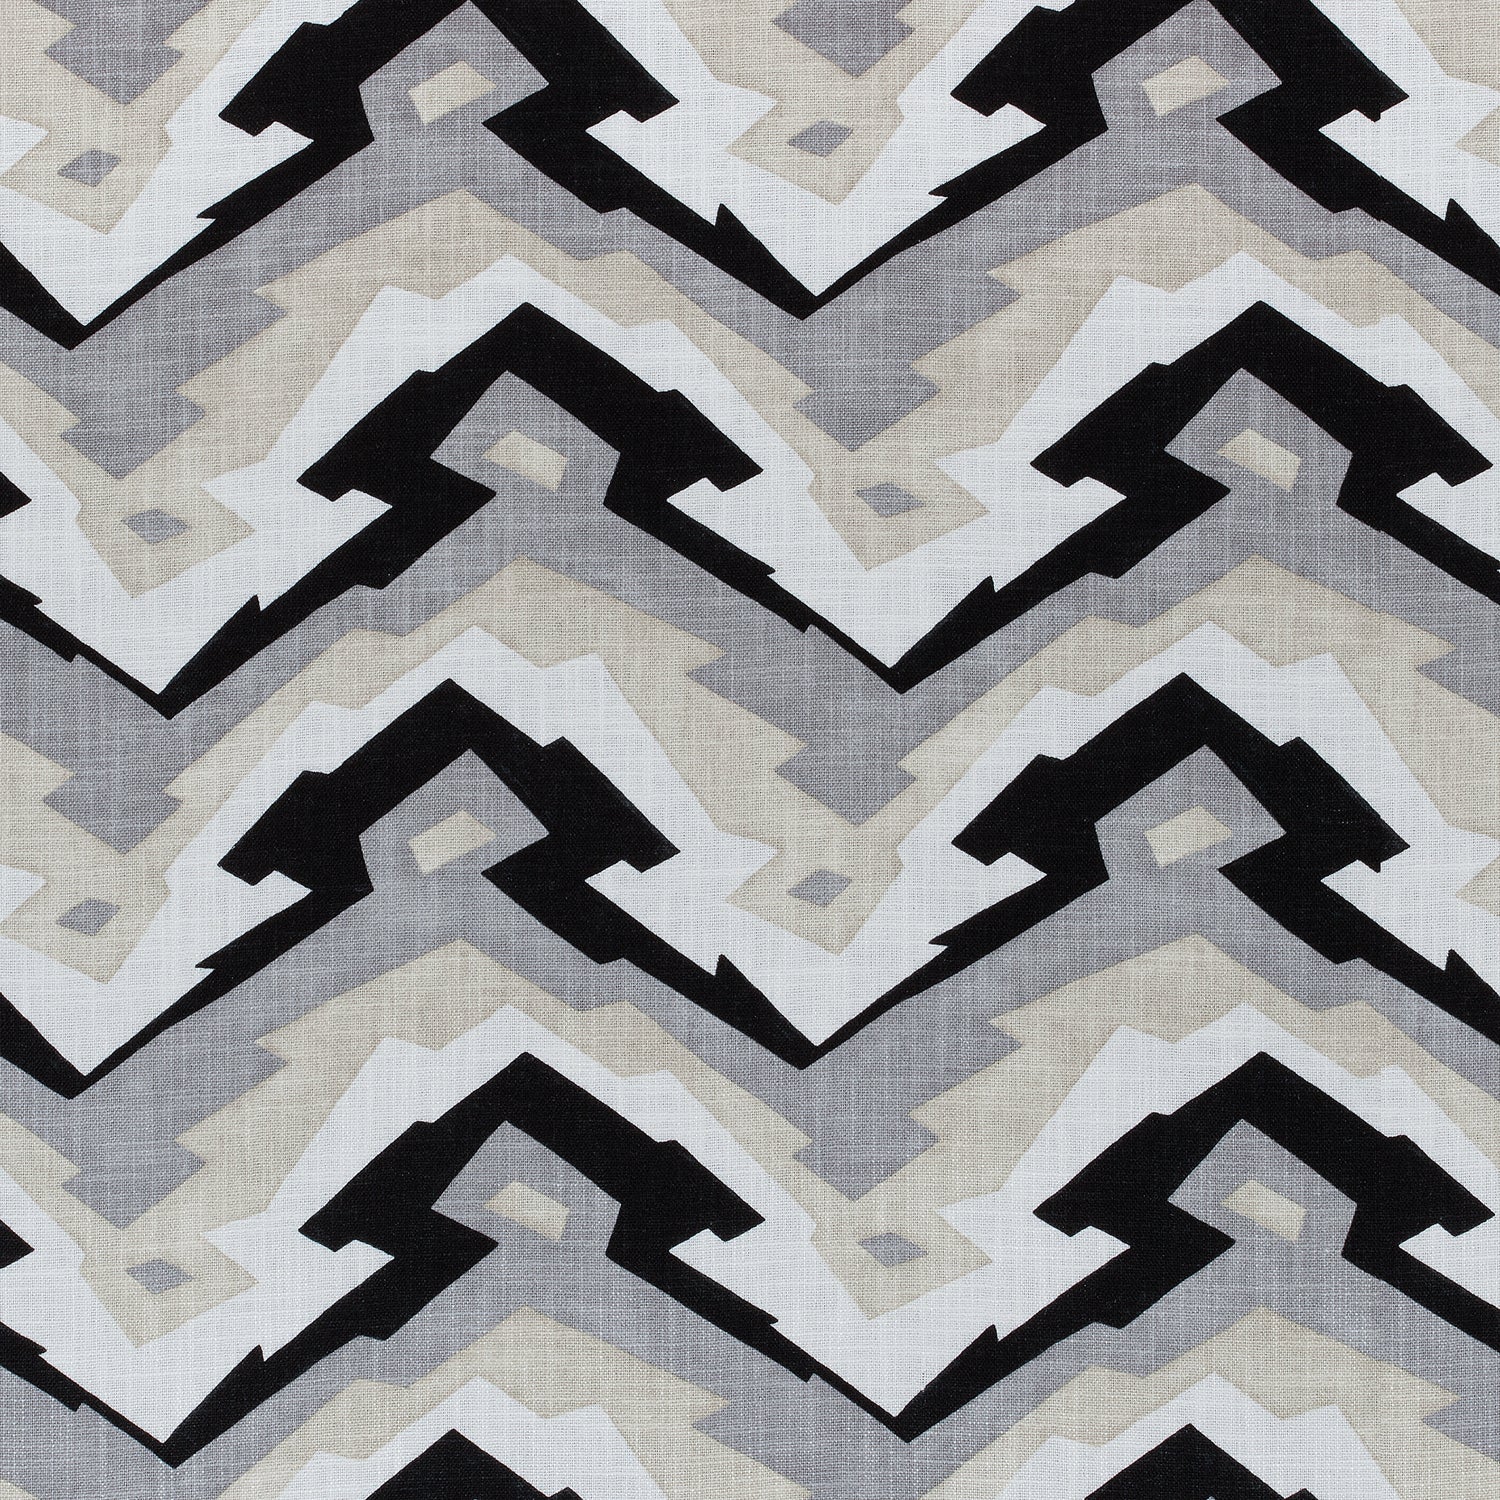 Deco Mountain fabric in black and grey color - pattern number F913078 - by Thibaut in the Summer House collection